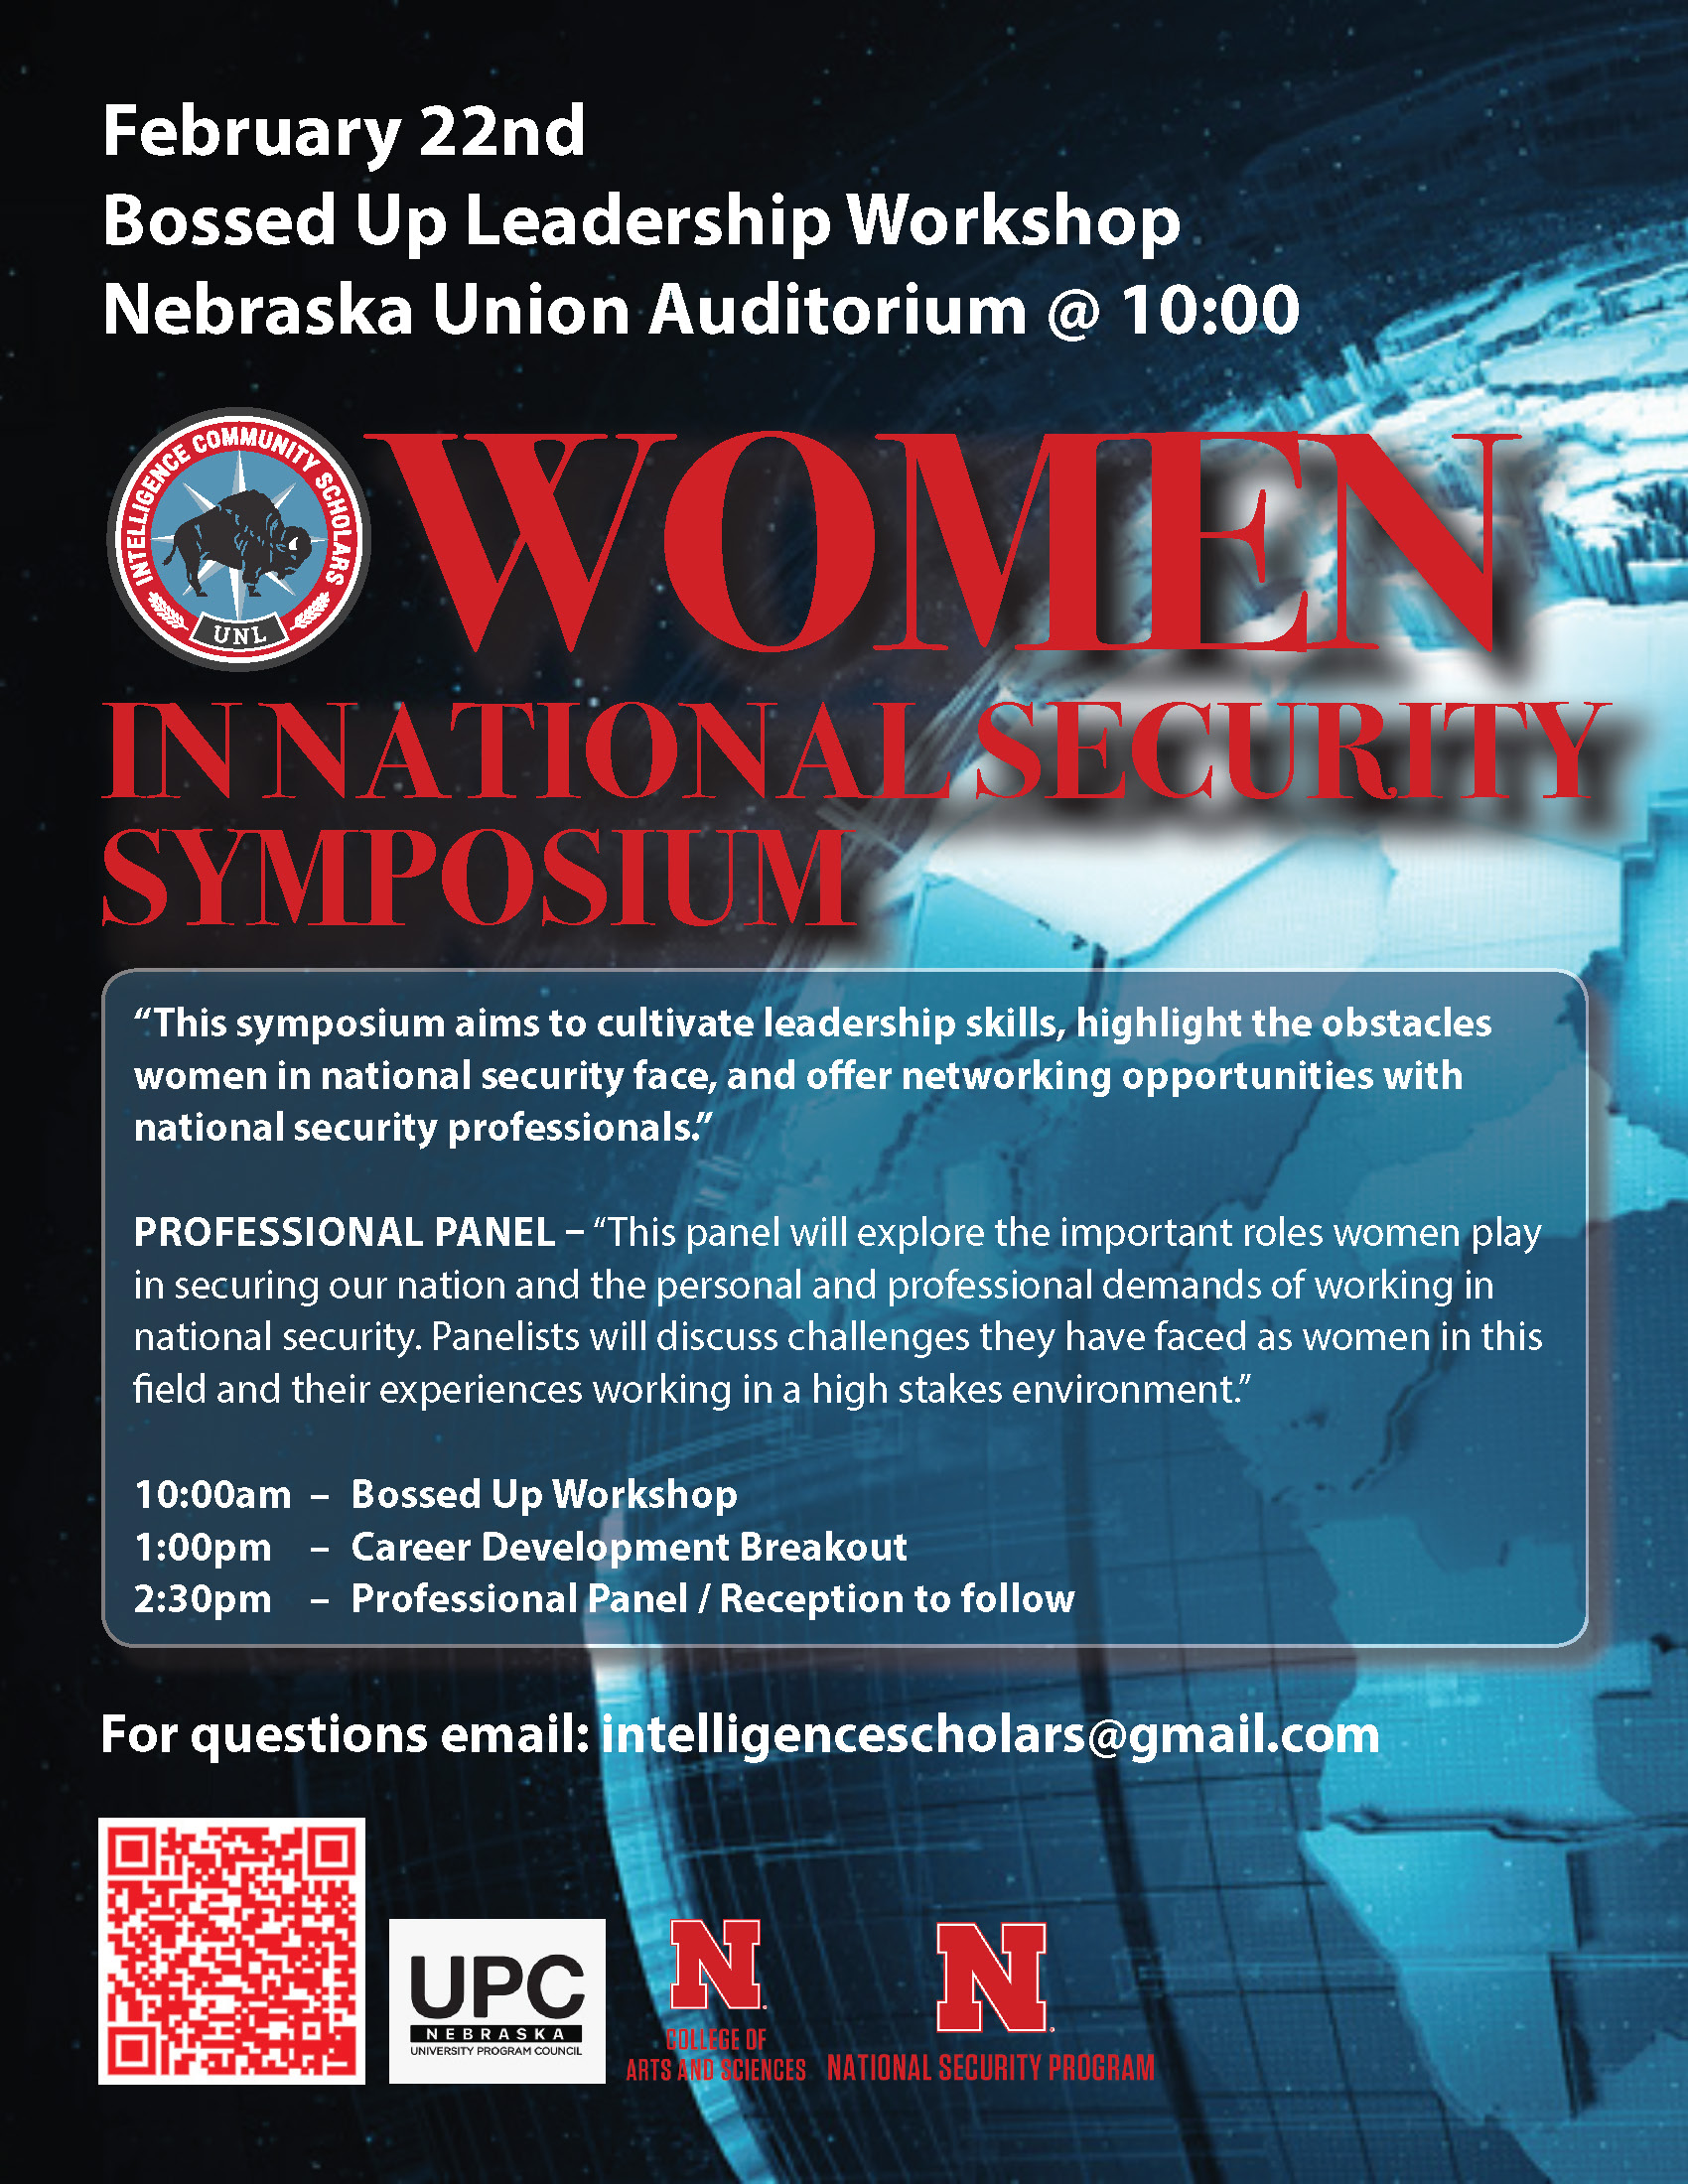 Women in National Security Symposium